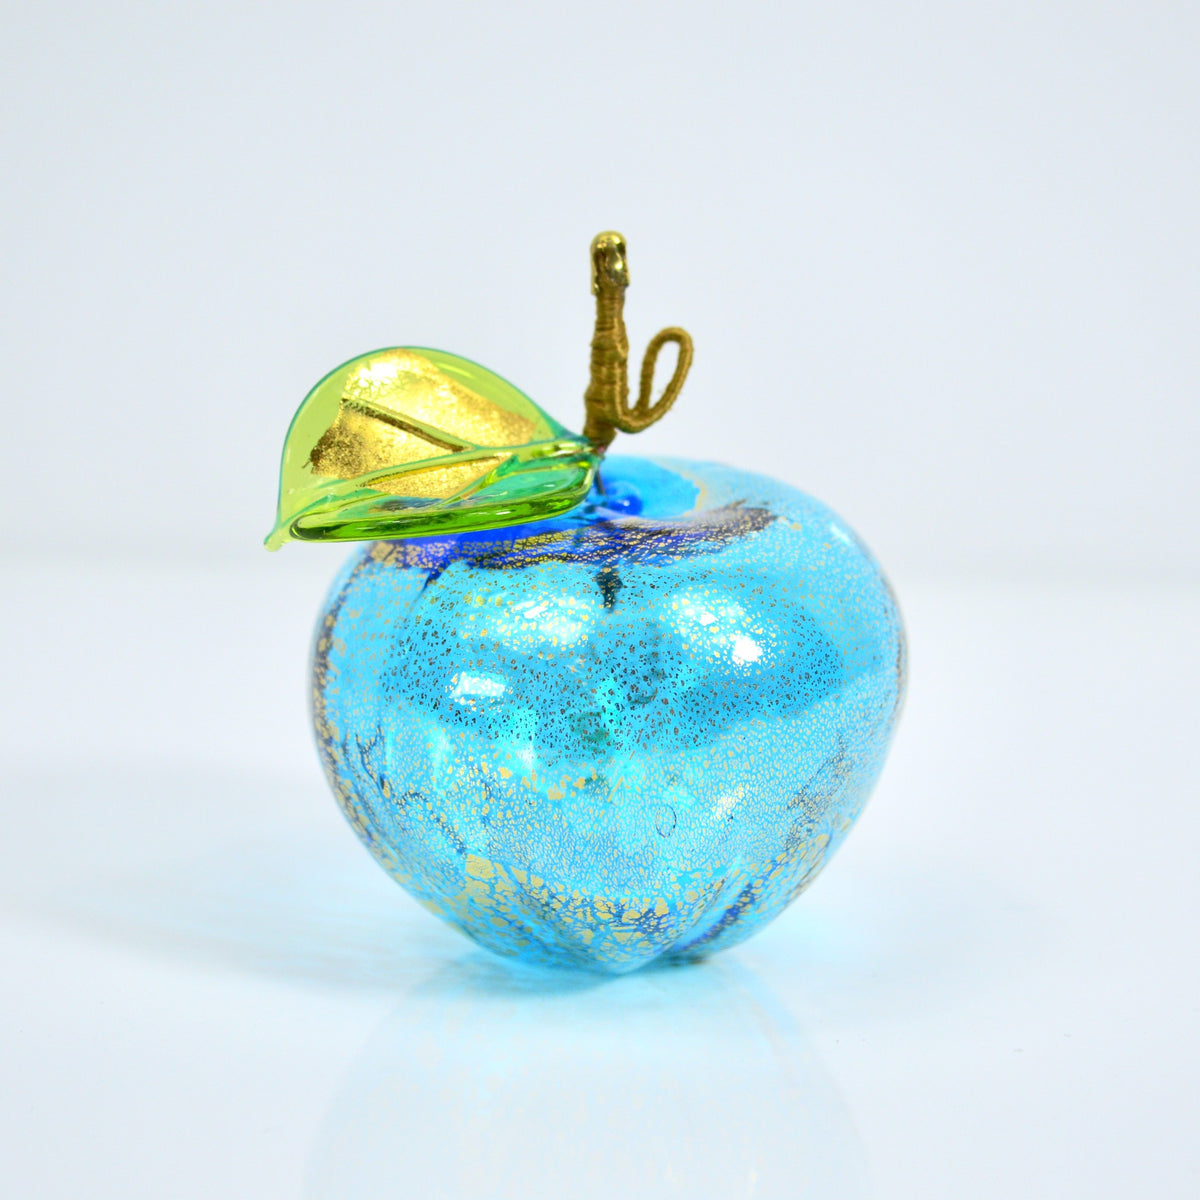 Murano Blown Glass Apple, 24k Gold Foil, Hand Blown in Italy